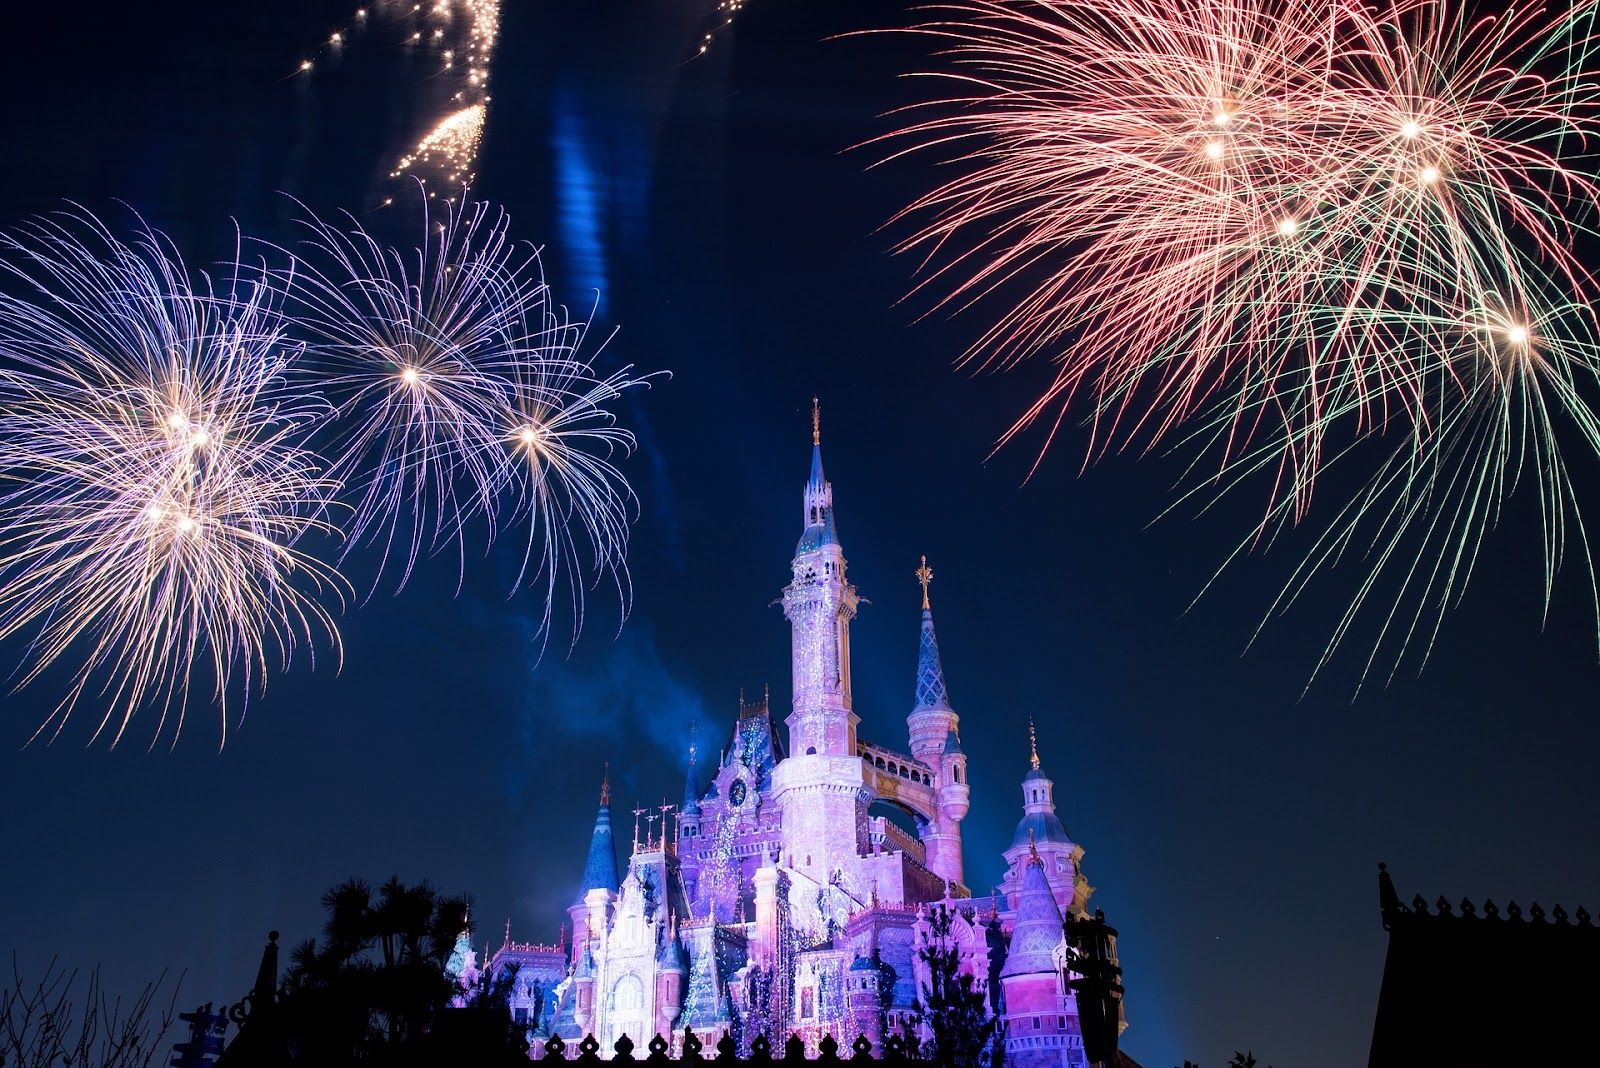 A Look at Some Unusual Viewing Locations for the Magic Kingdom's Fireworks